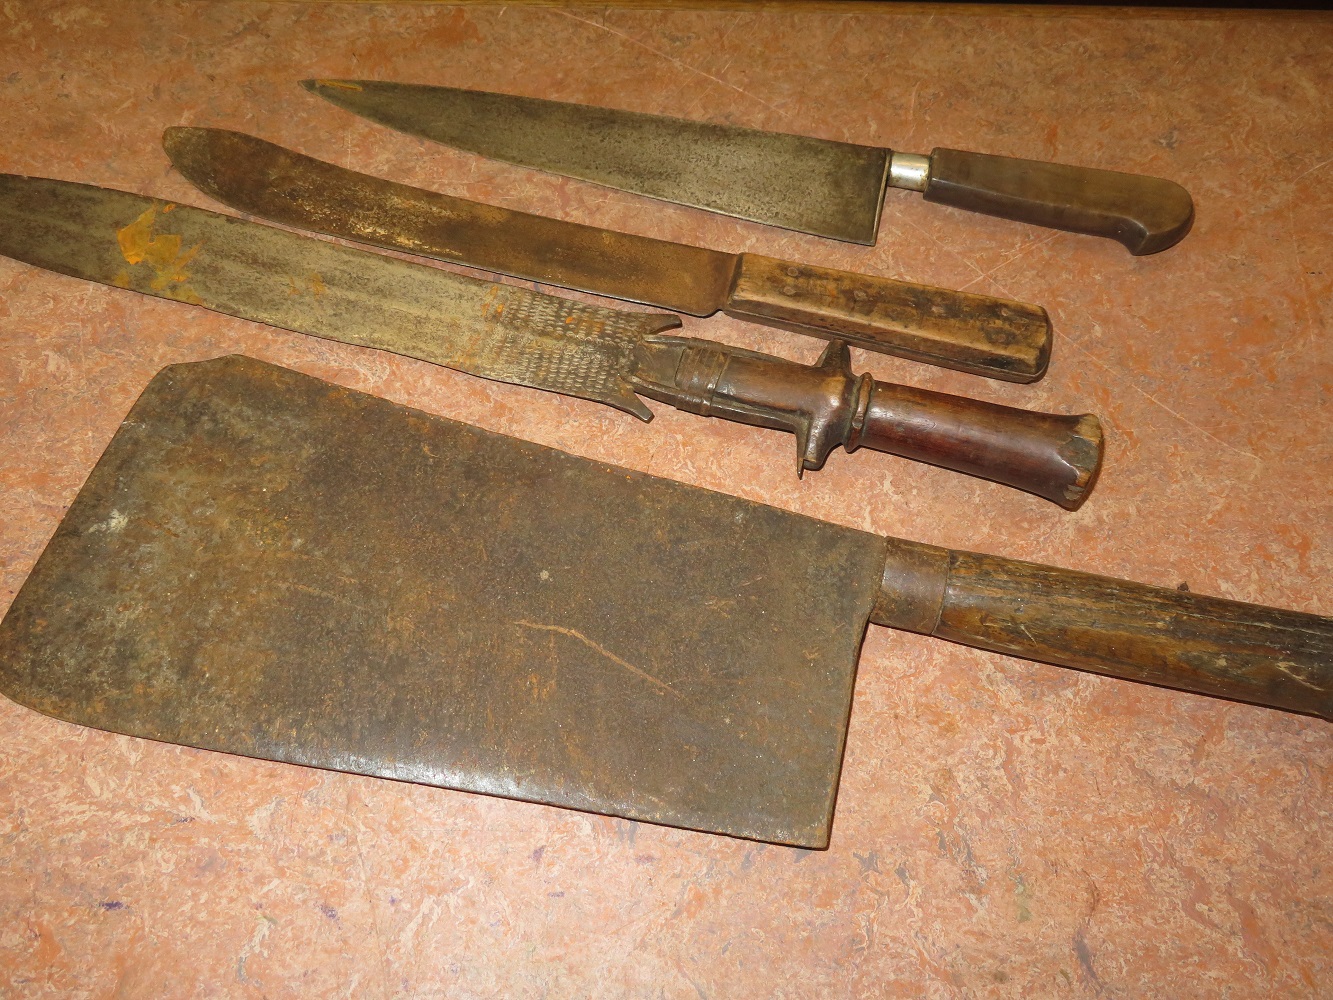 Large cleaver & 3 others